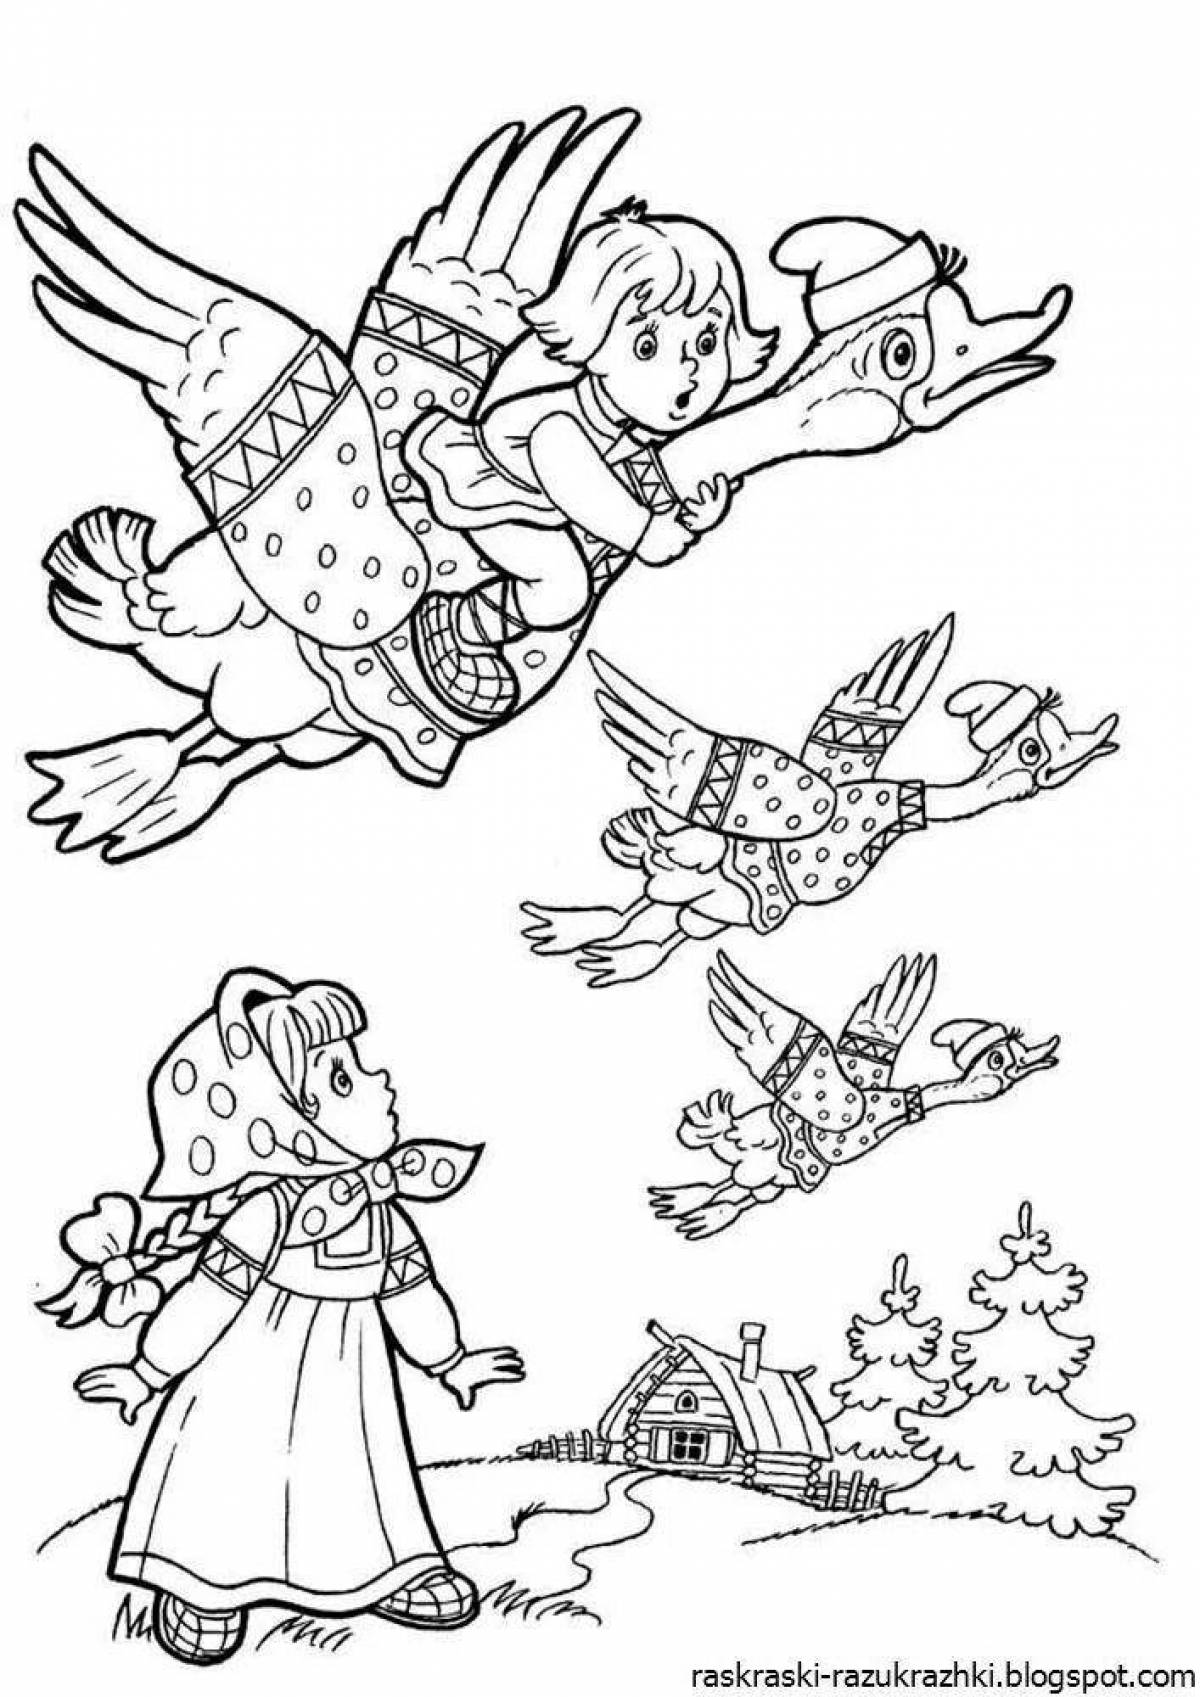 Exotic coloring book heroes of Russian fairy tales